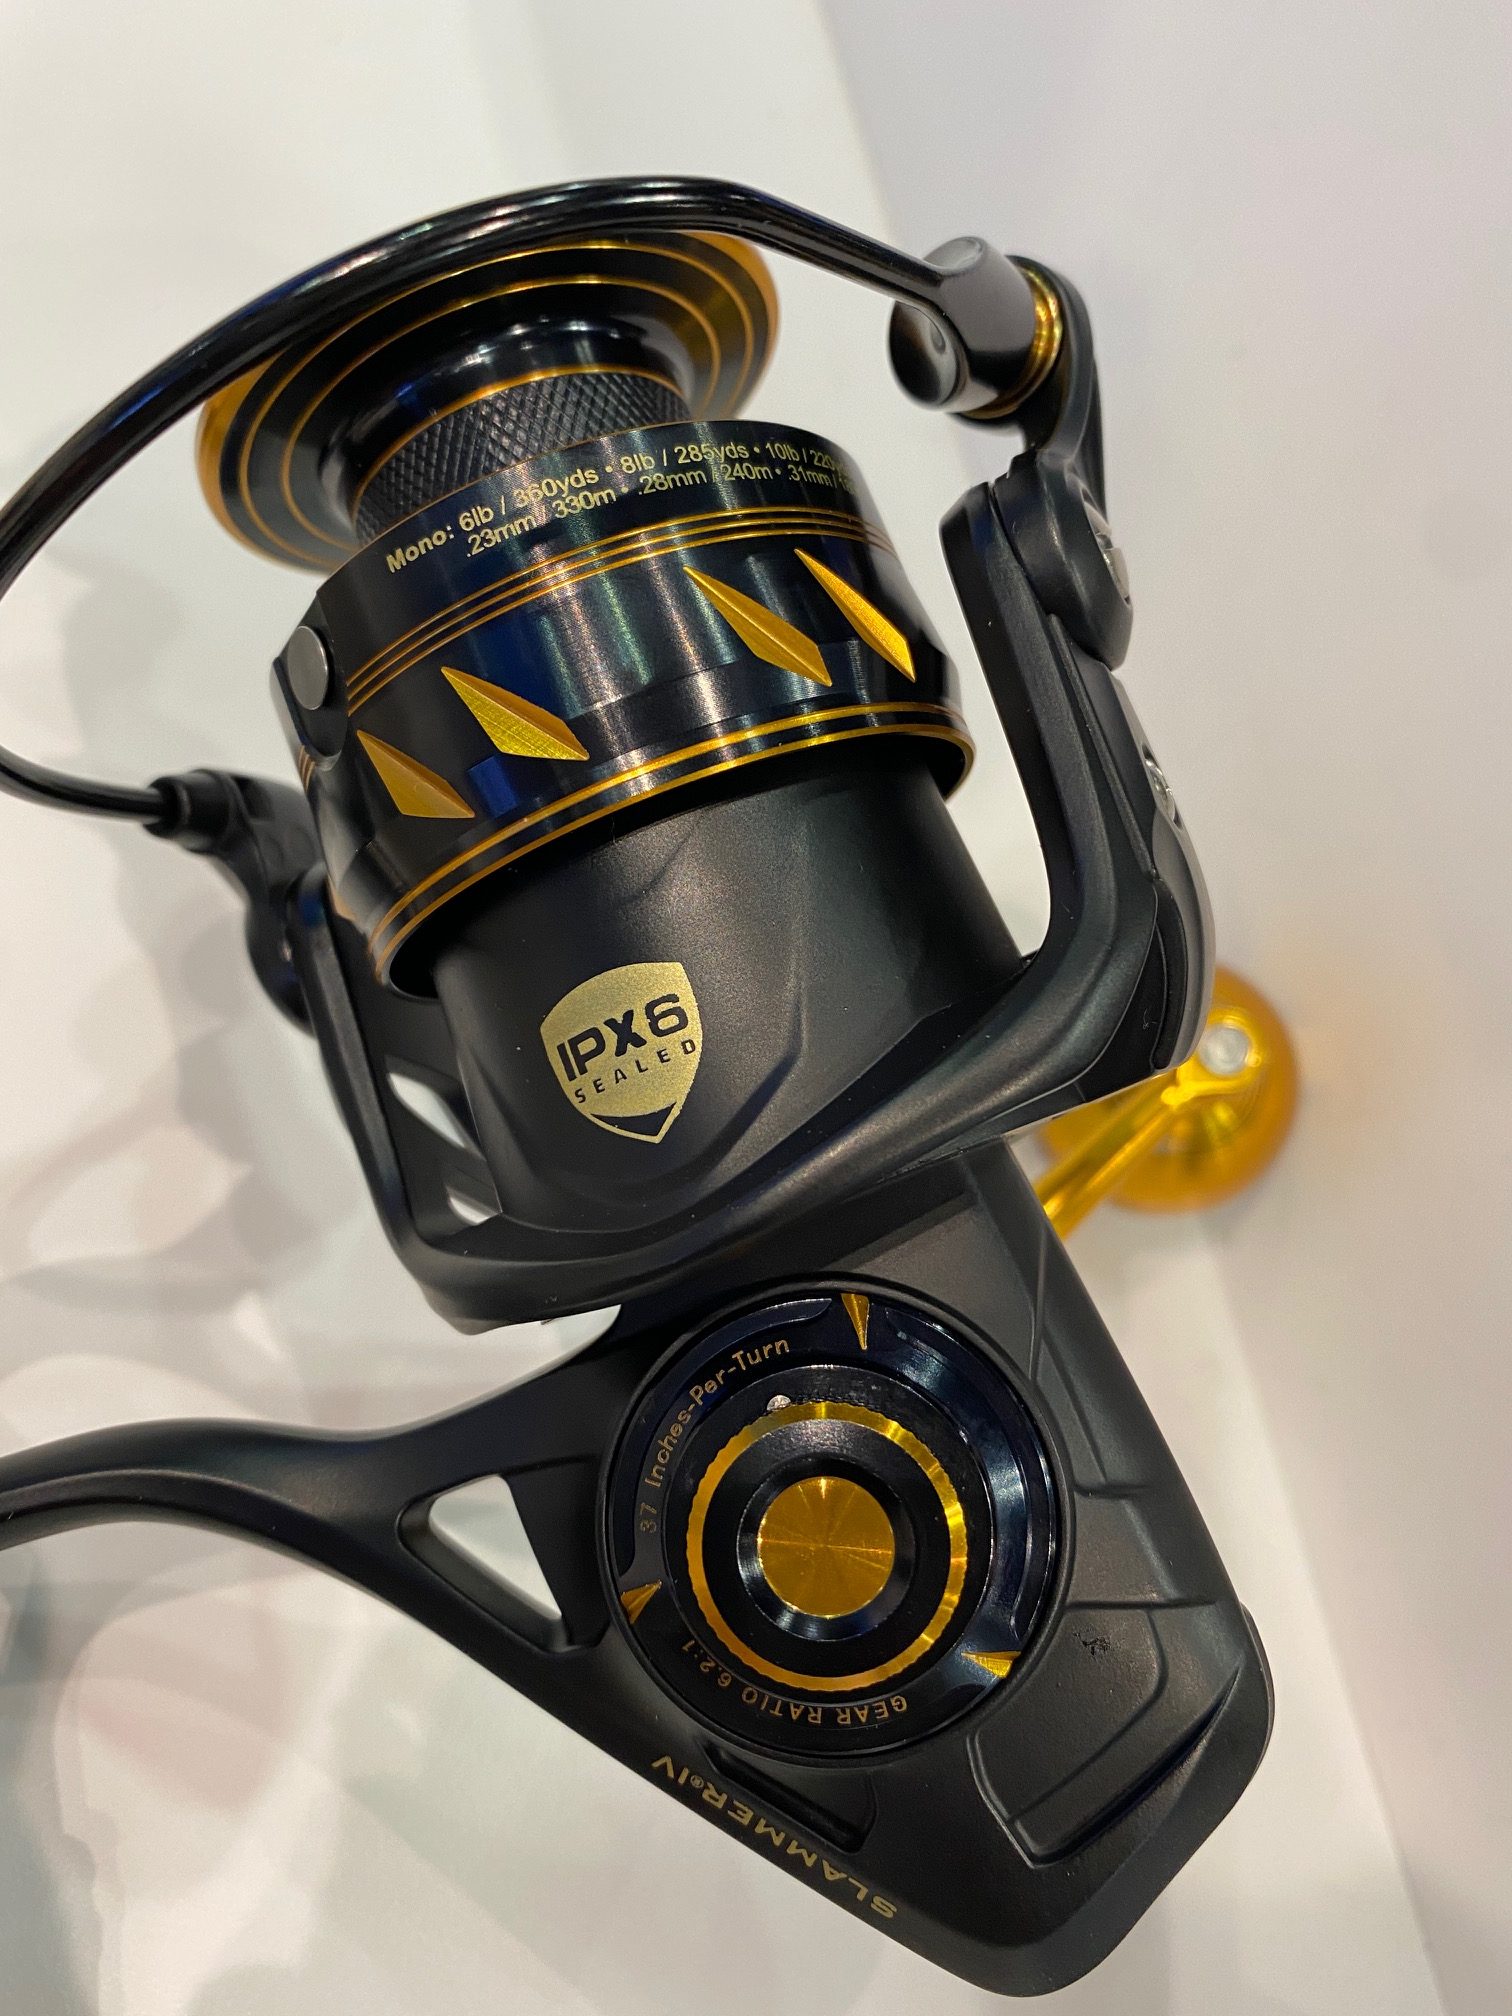 PENN Fishing - The Slammer IV DX (Dealer Exclusive) can be found